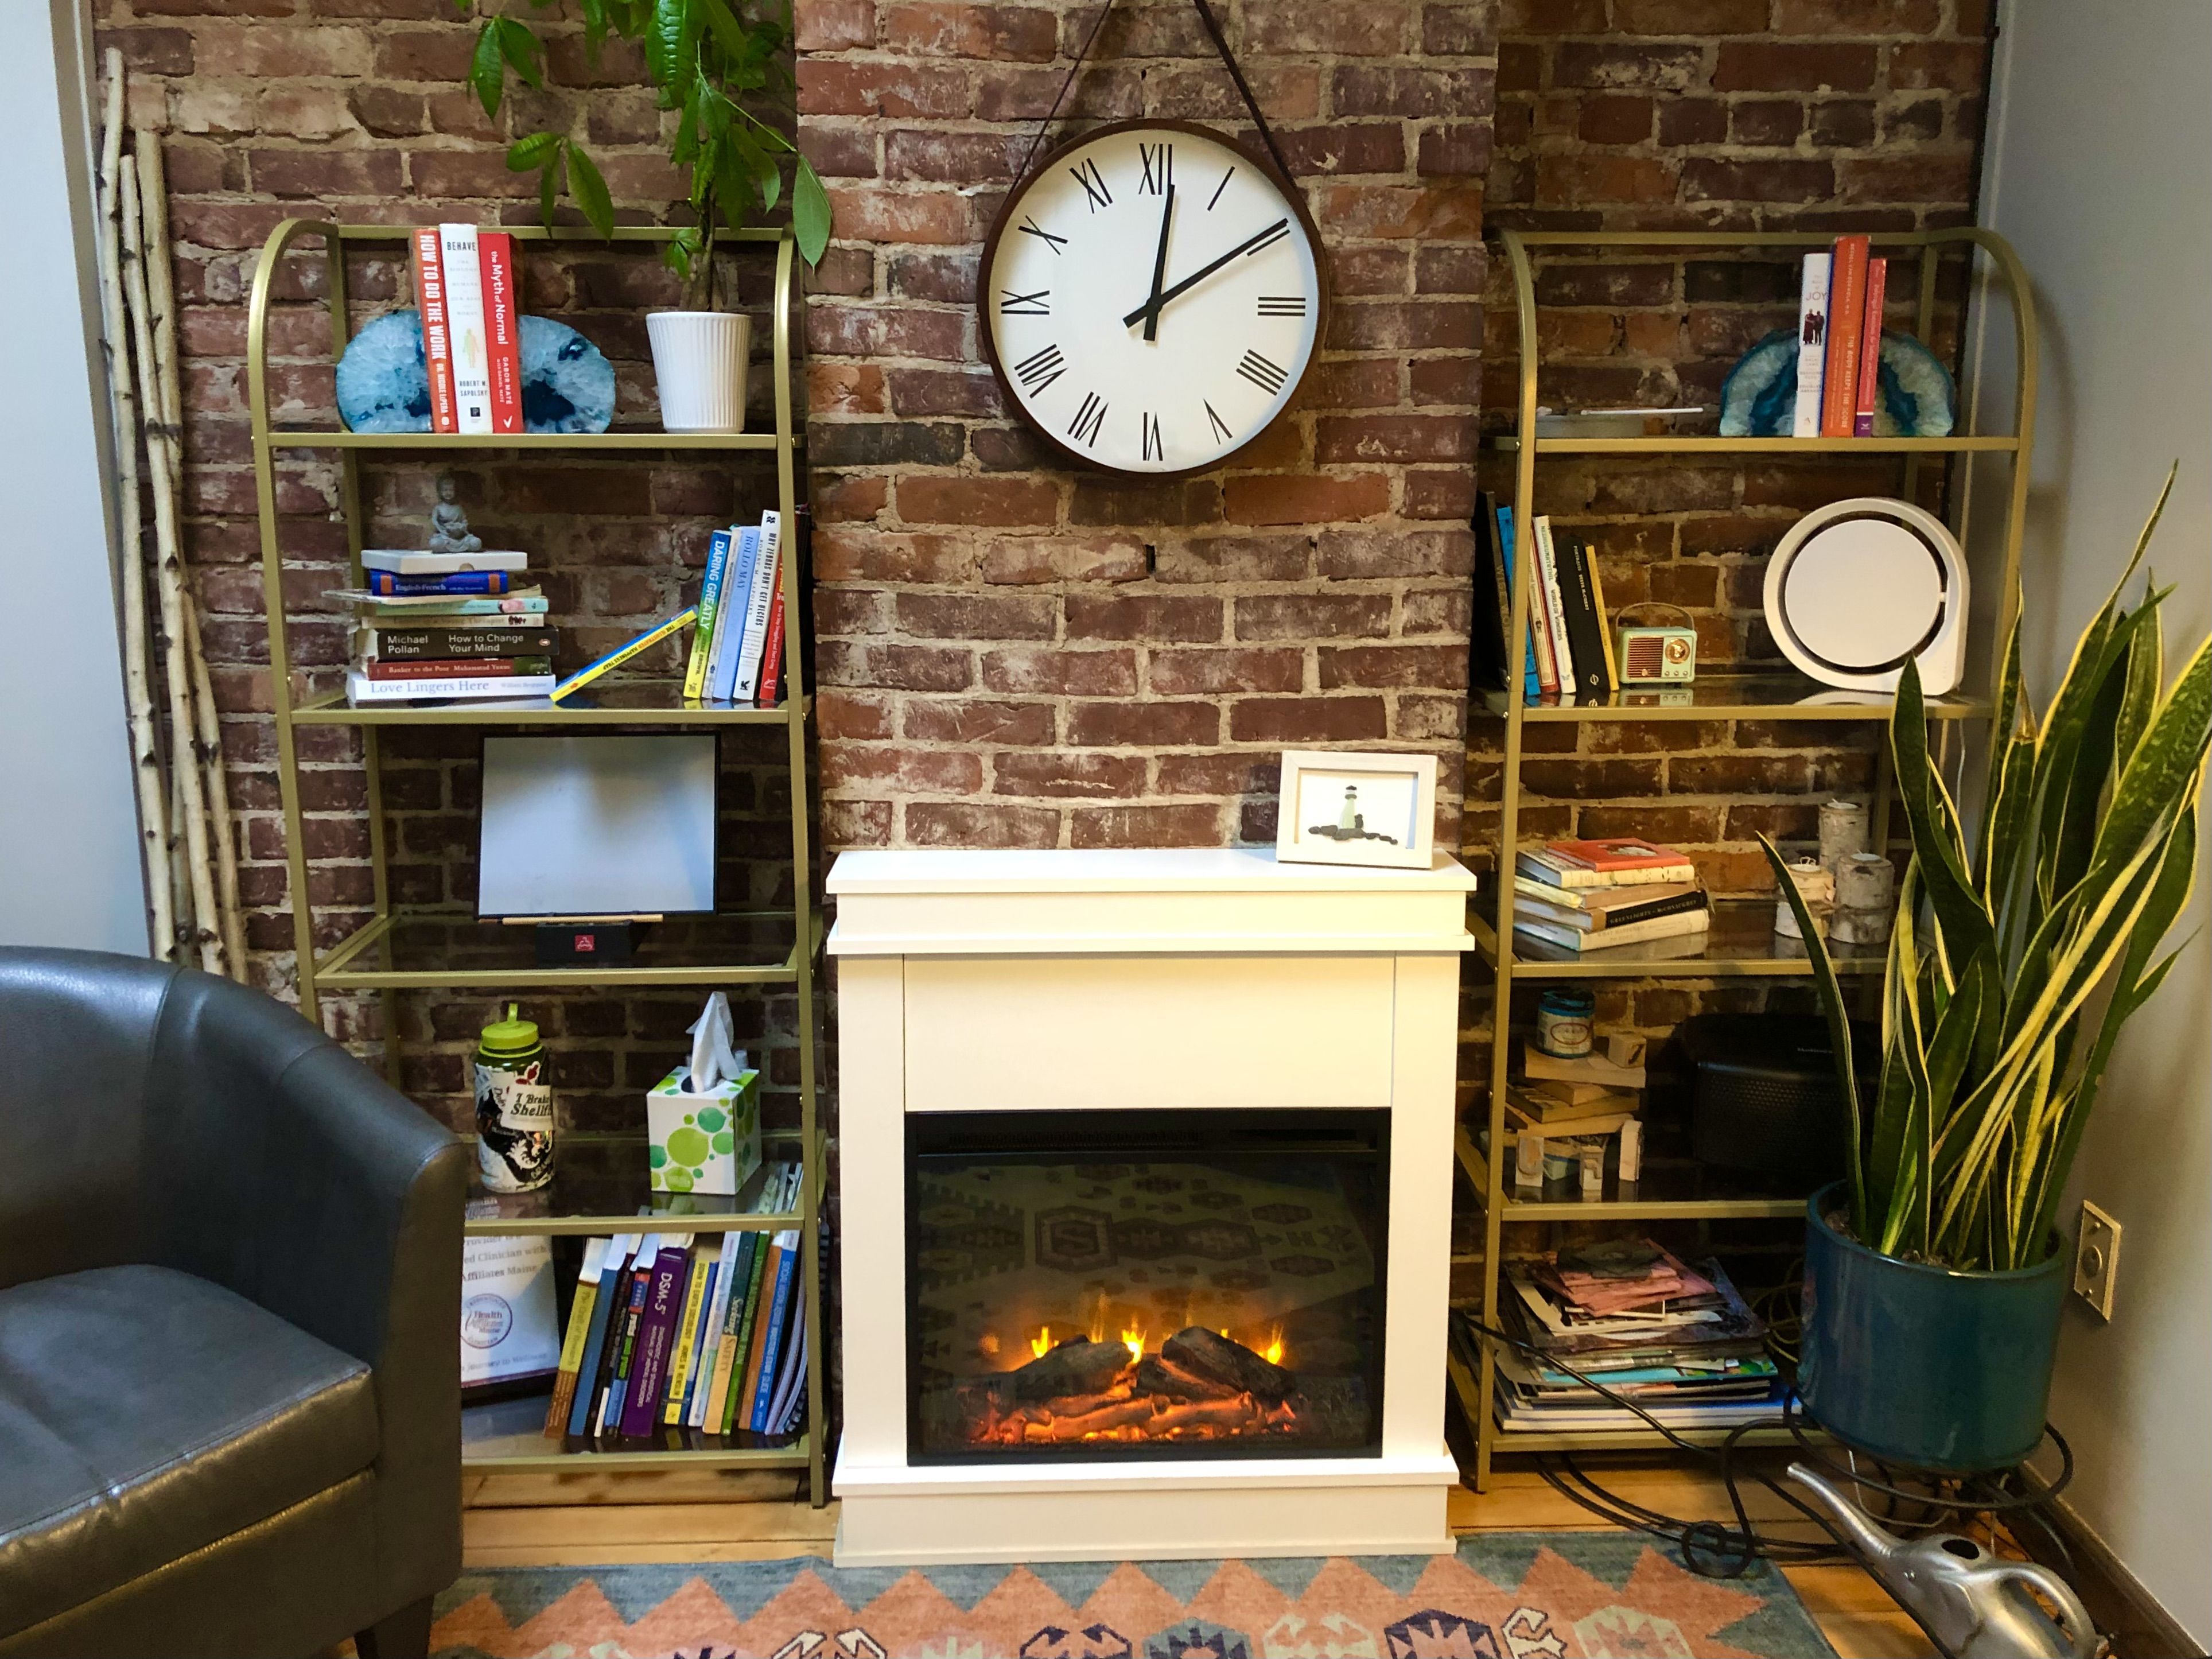 Fireplace by brick wall, book shelves and comfy chair